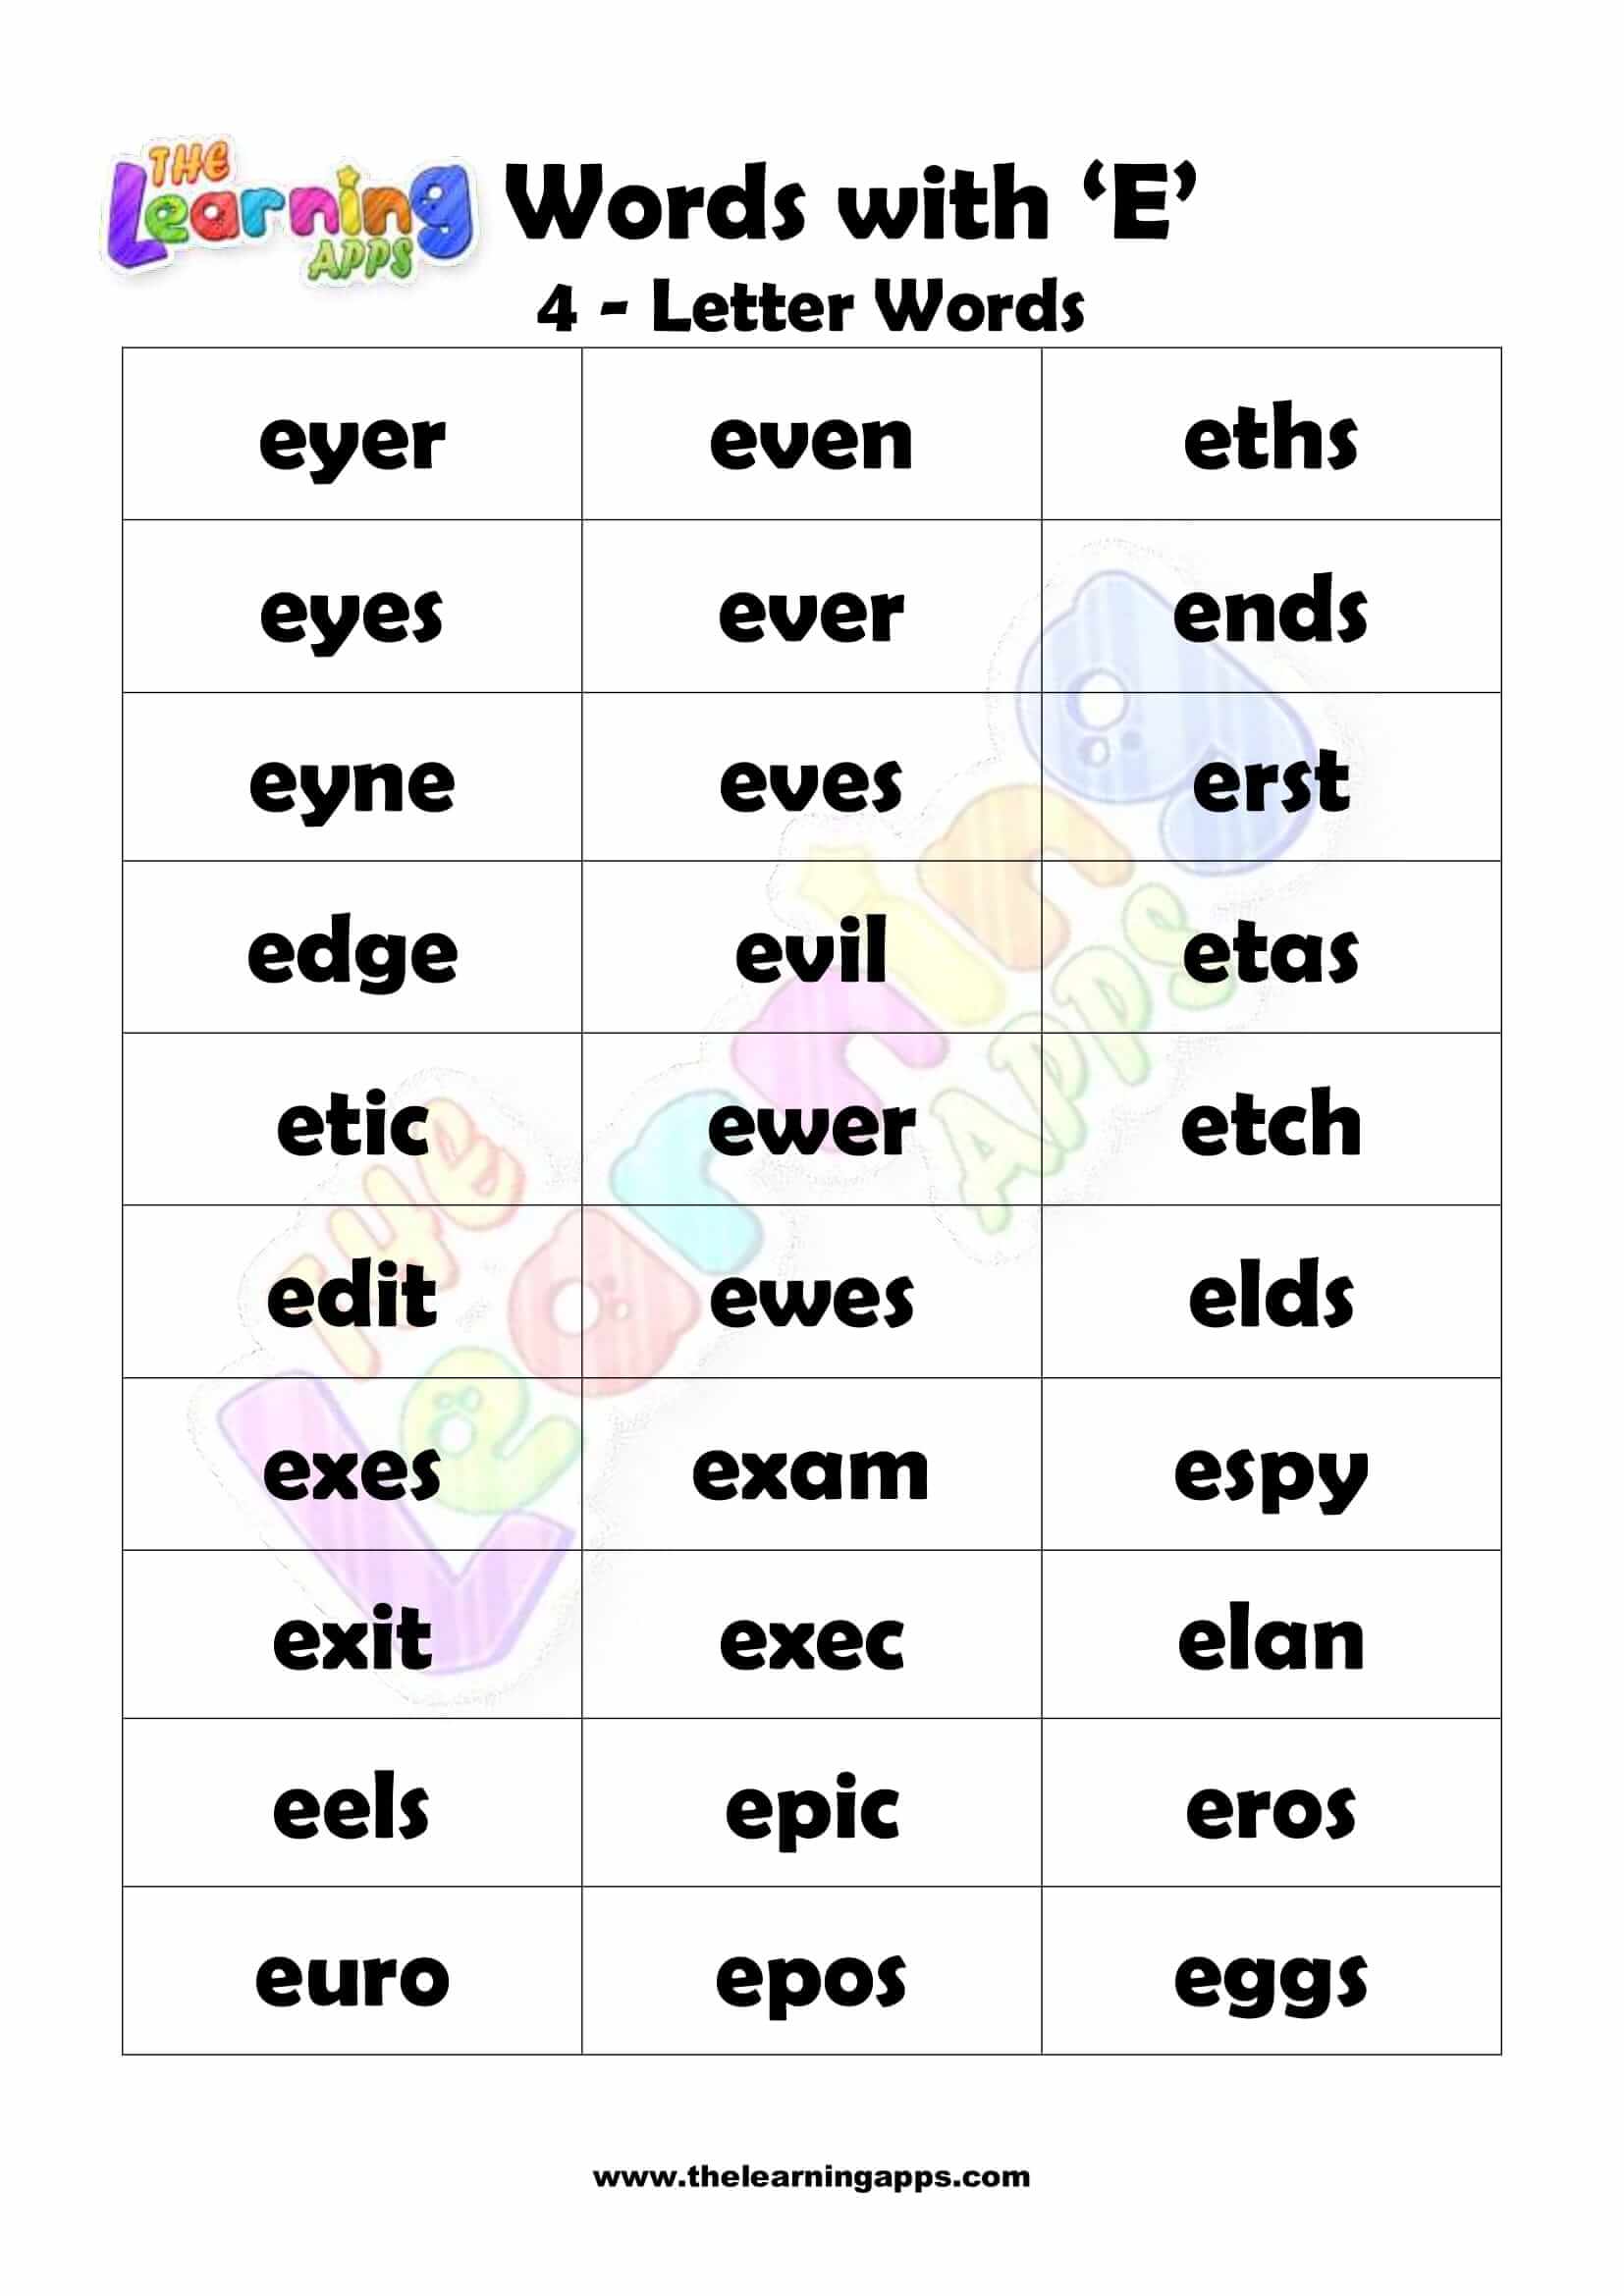 4 LETTER WORD STARTING WITH E